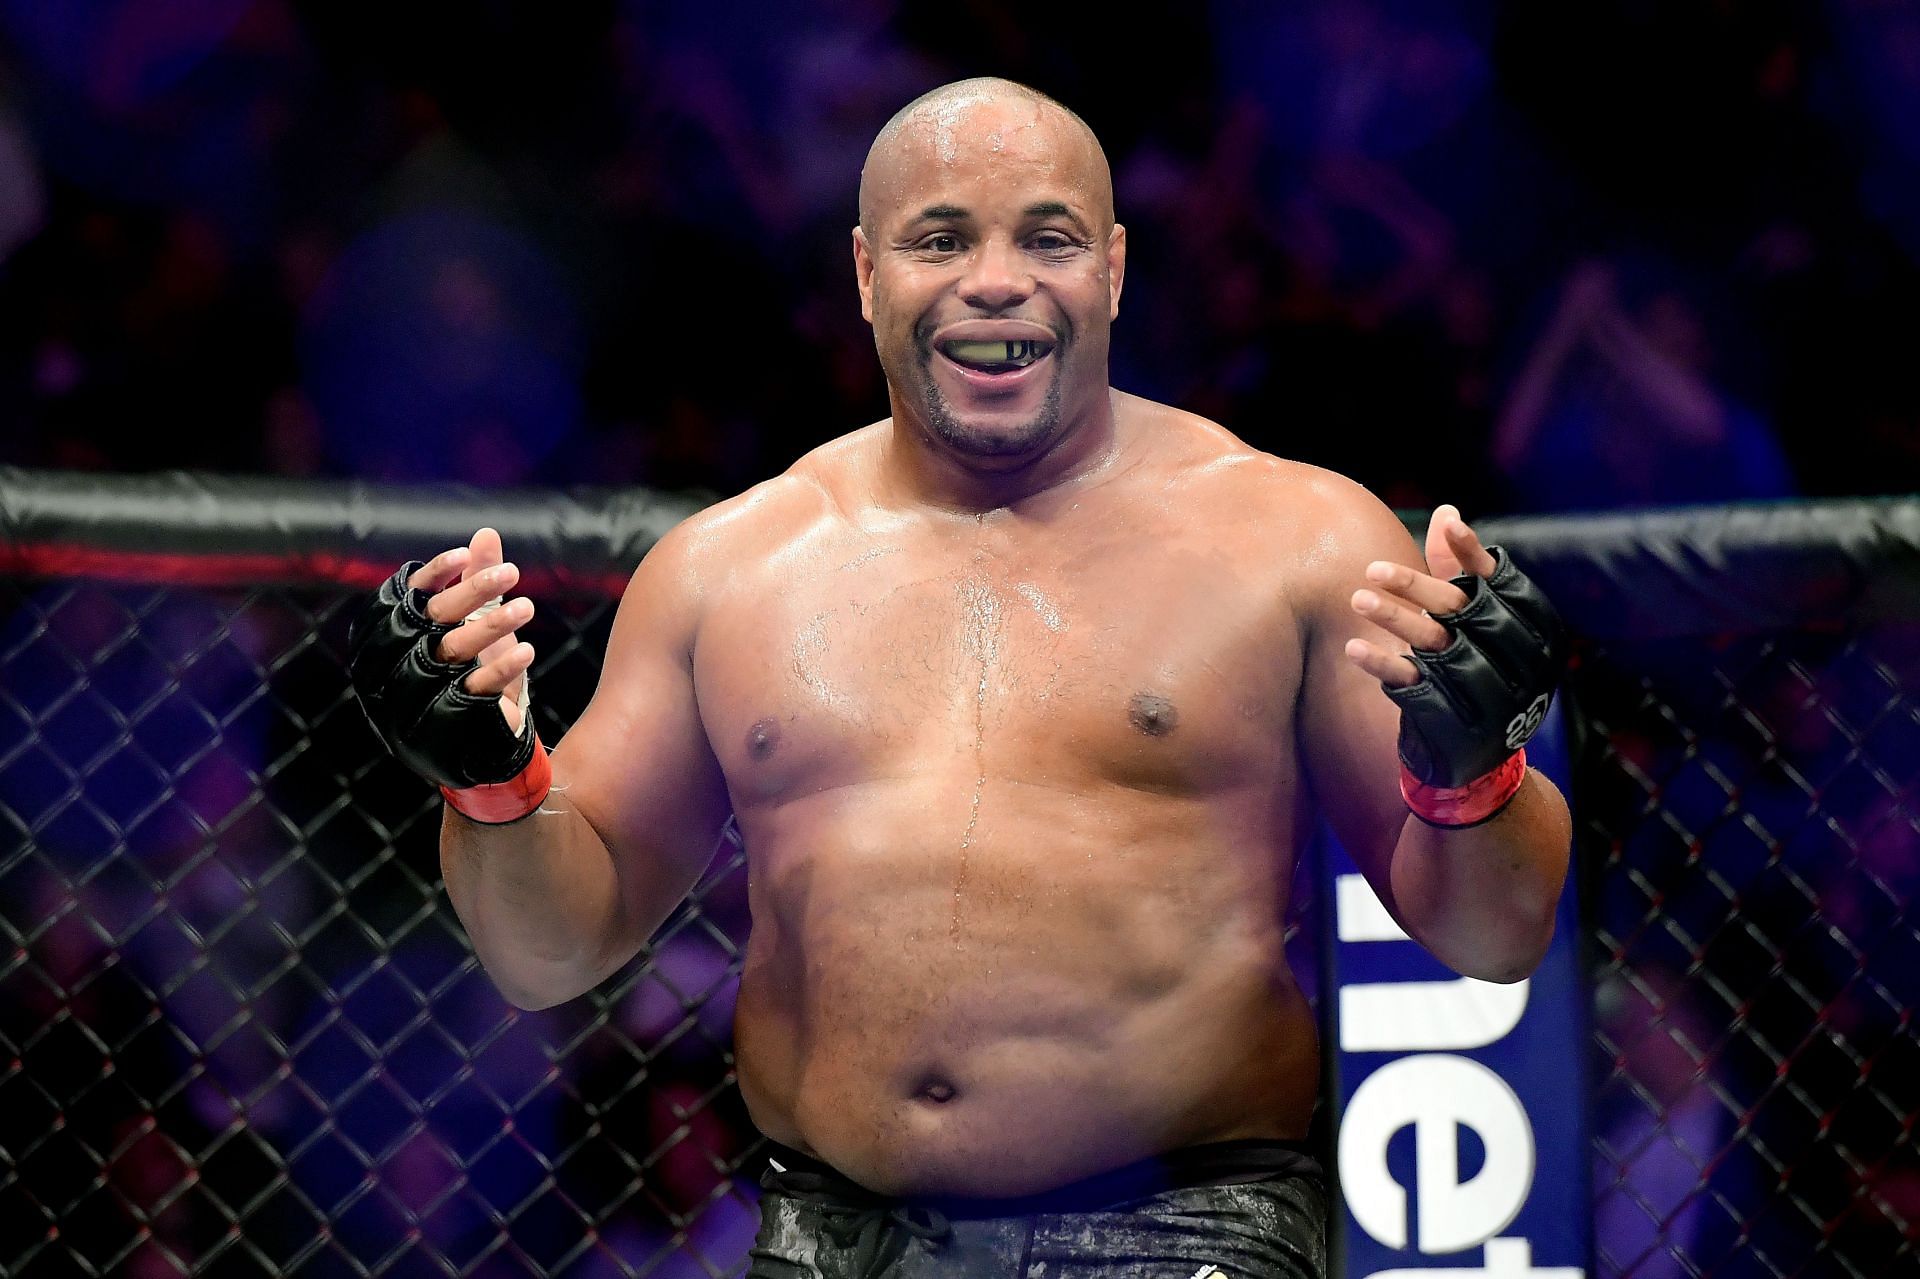 Daniel Cormier moved to 205lbs rather than face teammate Cain Velasquez at heavyweight